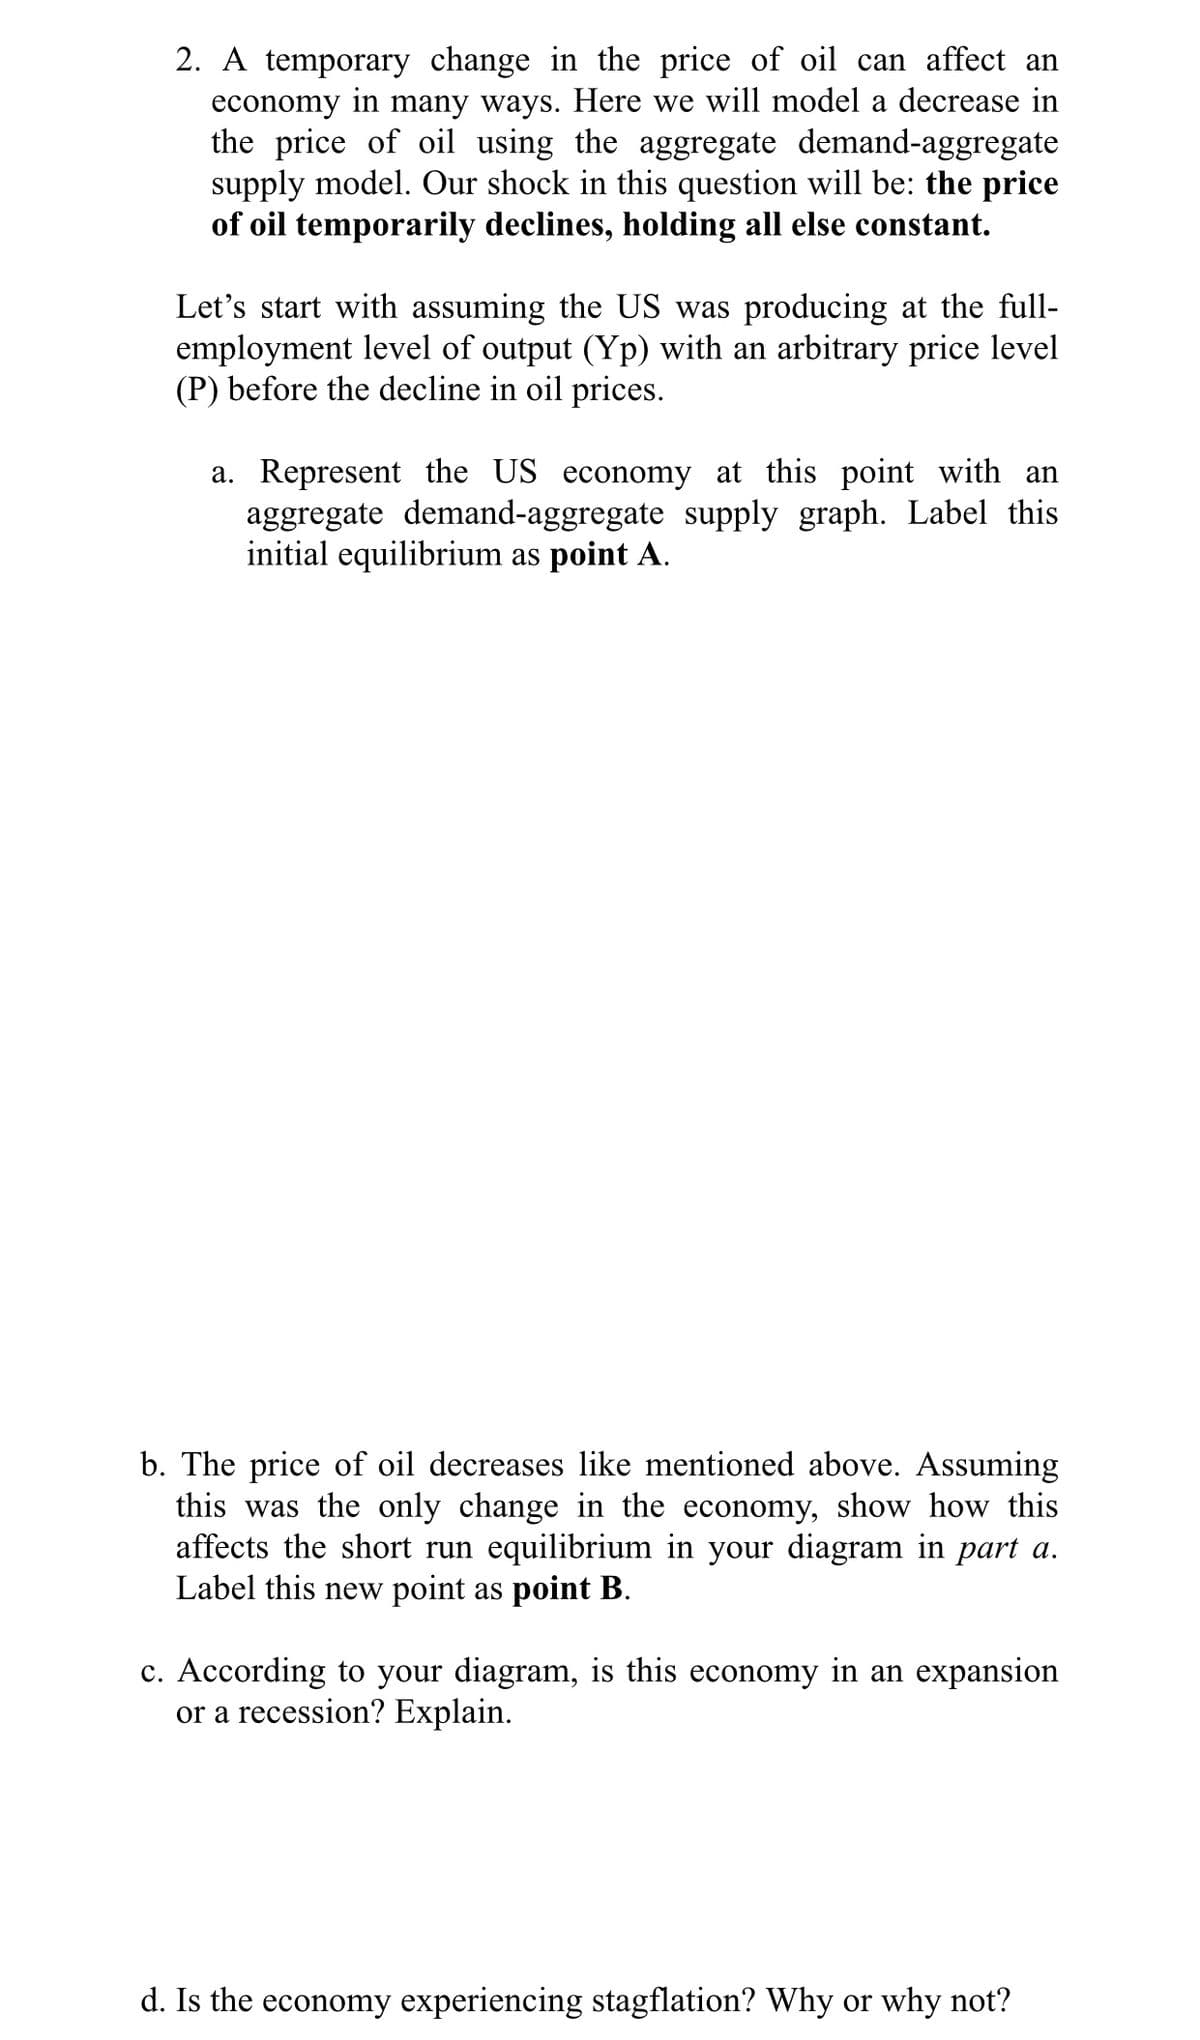 2. A temporary change in the price of oil can affect an
economy in many ways. Here we will model a decrease in
the price of oil using the aggregate demand-aggregate
supply model. Our shock in this question will be: the price
of oil temporarily declines, holding all else constant.
Let's start with assuming the US was producing at the full-
employment level of output (Yp) with an arbitrary price level
(P) before the decline in oil prices.
a. Represent the US economy at this point with an
aggregate demand-aggregate supply graph. Label this
initial equilibrium as point A.
b. The price of oil decreases like mentioned above. Assuming
this was the only change in the economy, show how this
affects the short run equilibrium in your diagram in part a.
Label this new point as point B.
c. According to your diagram, is this economy in an expansion
or a recession? Explain.
d. Is the economy experiencing stagflation? Why or why not?
